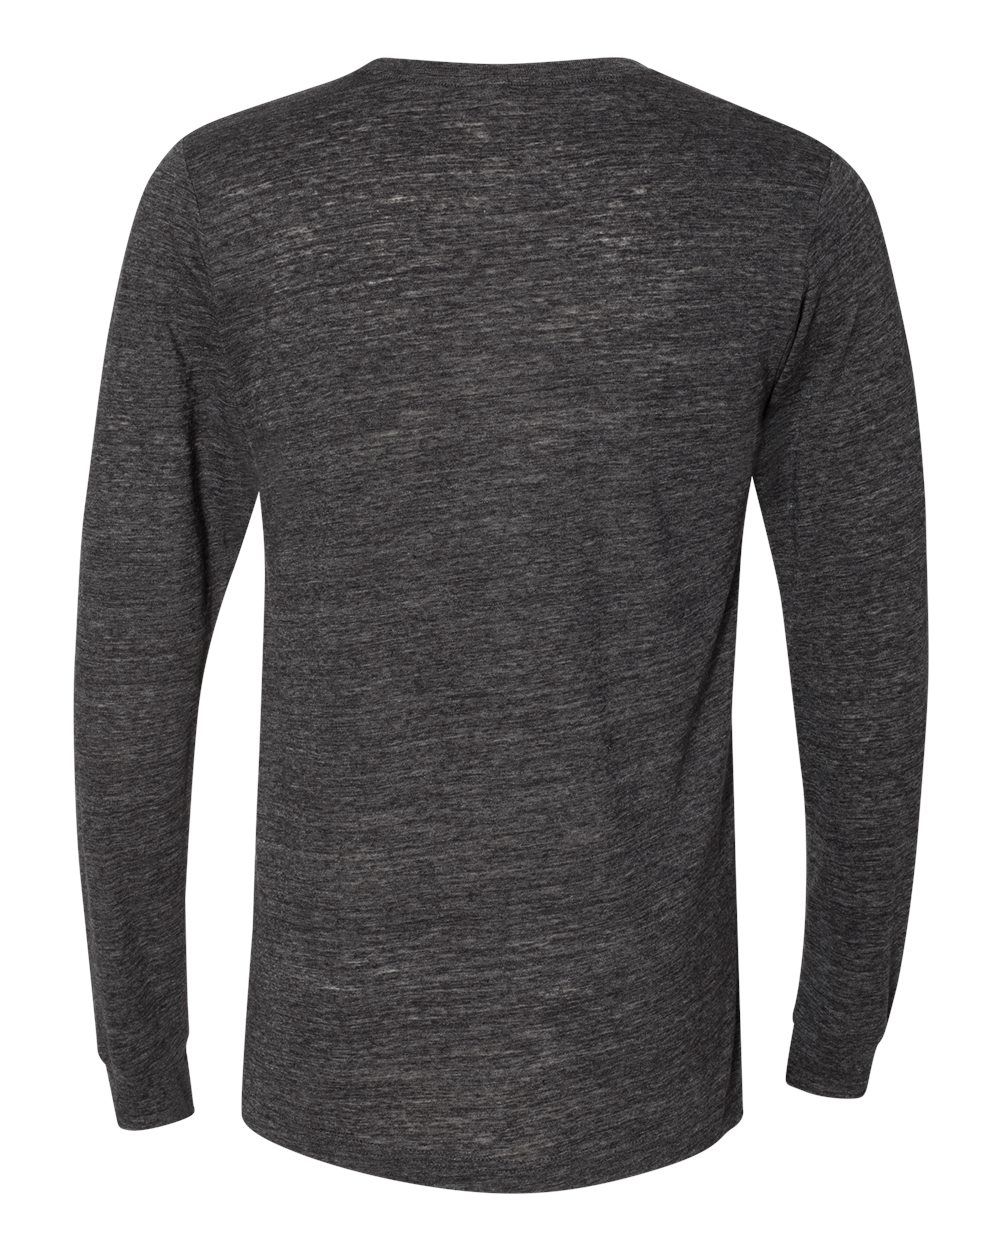 Download BELLA + CANVAS Mens Blank Top Long Sleeve Jersey Tee T Shirt 3501 up to 3XL | eBay